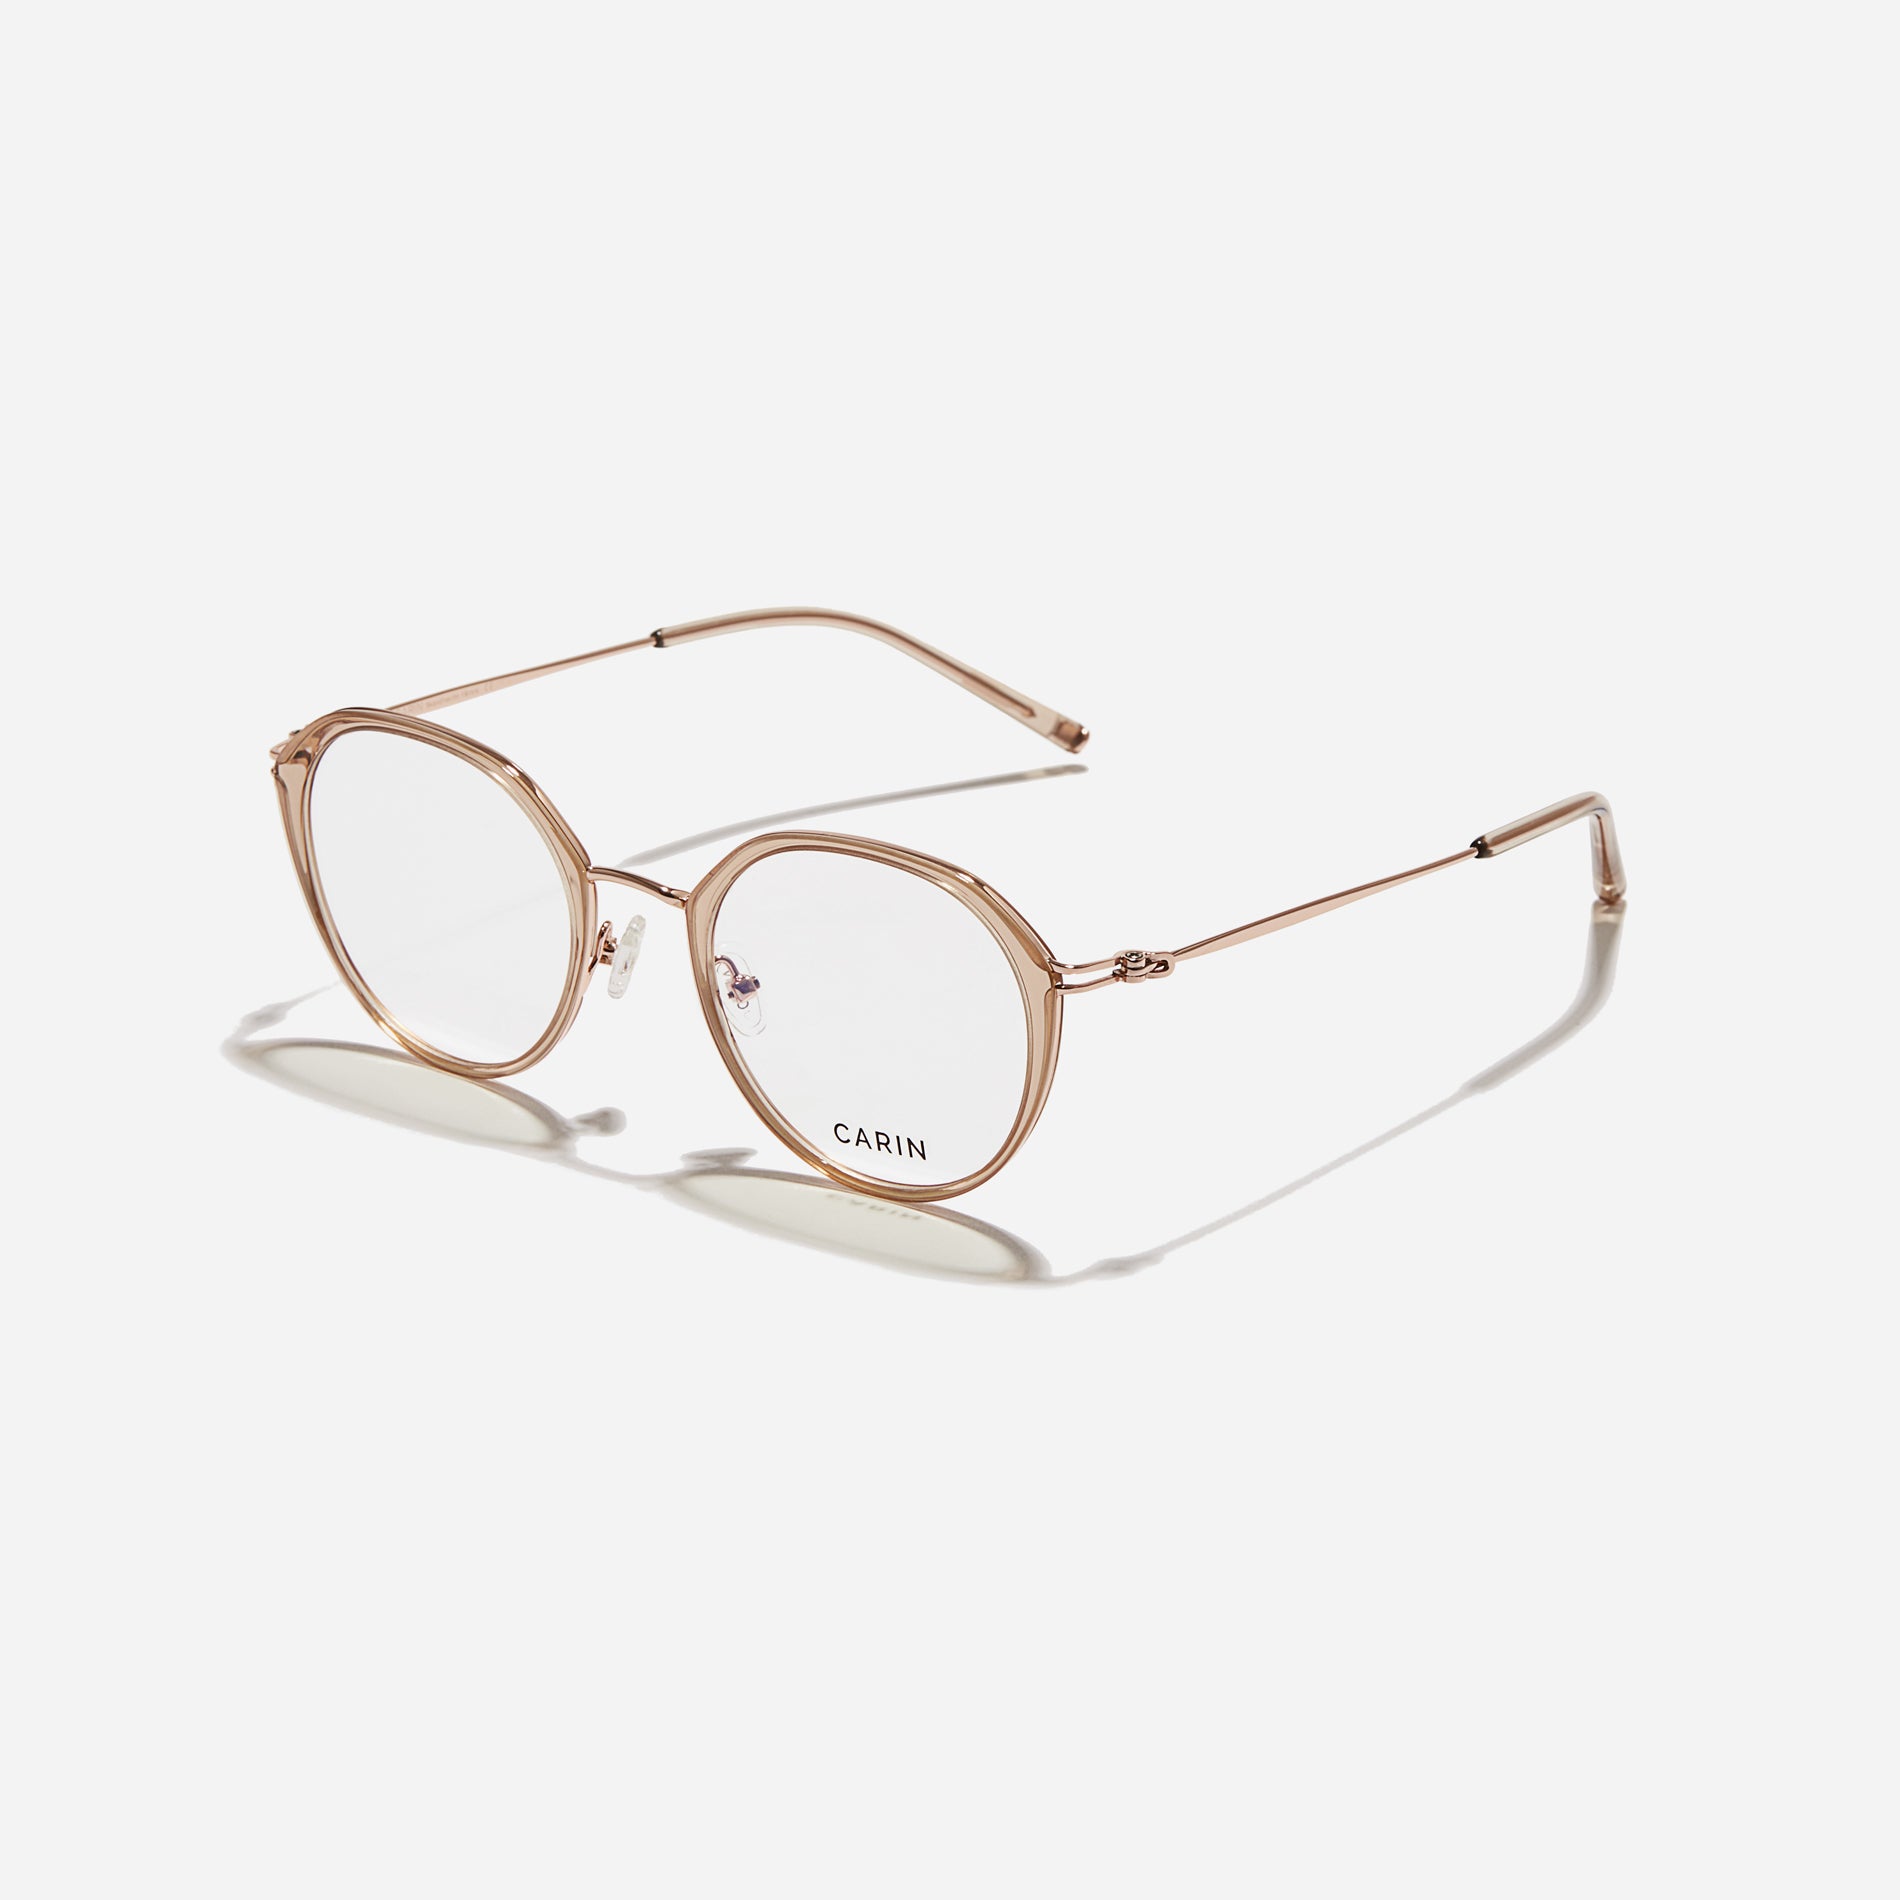 Polygonal-shaped eyeglasses that feature a contrasting round lens design, offering a smooth yet refined style.  They provide a comfortable wearing experience with slim temples made from lightweight and elastic B-Titanium material.